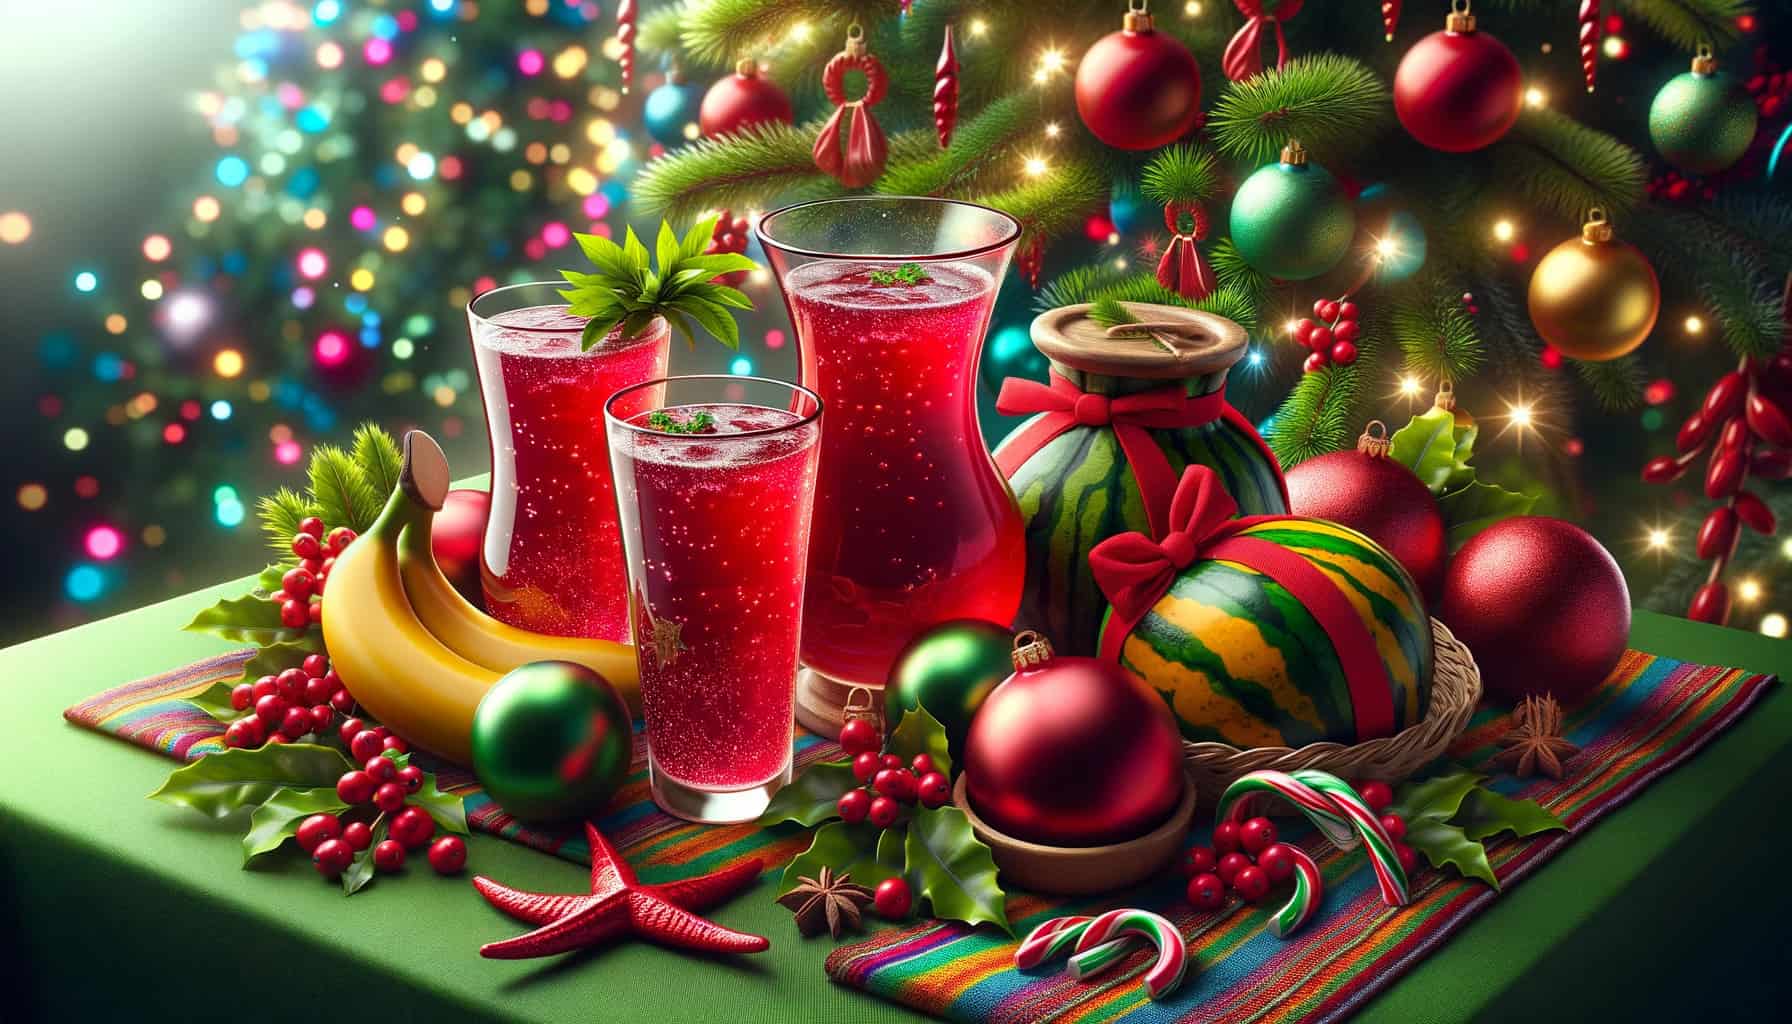 Trinidadian christmas sorrel drinks are set on a festive table with traditional caribbean decorations.